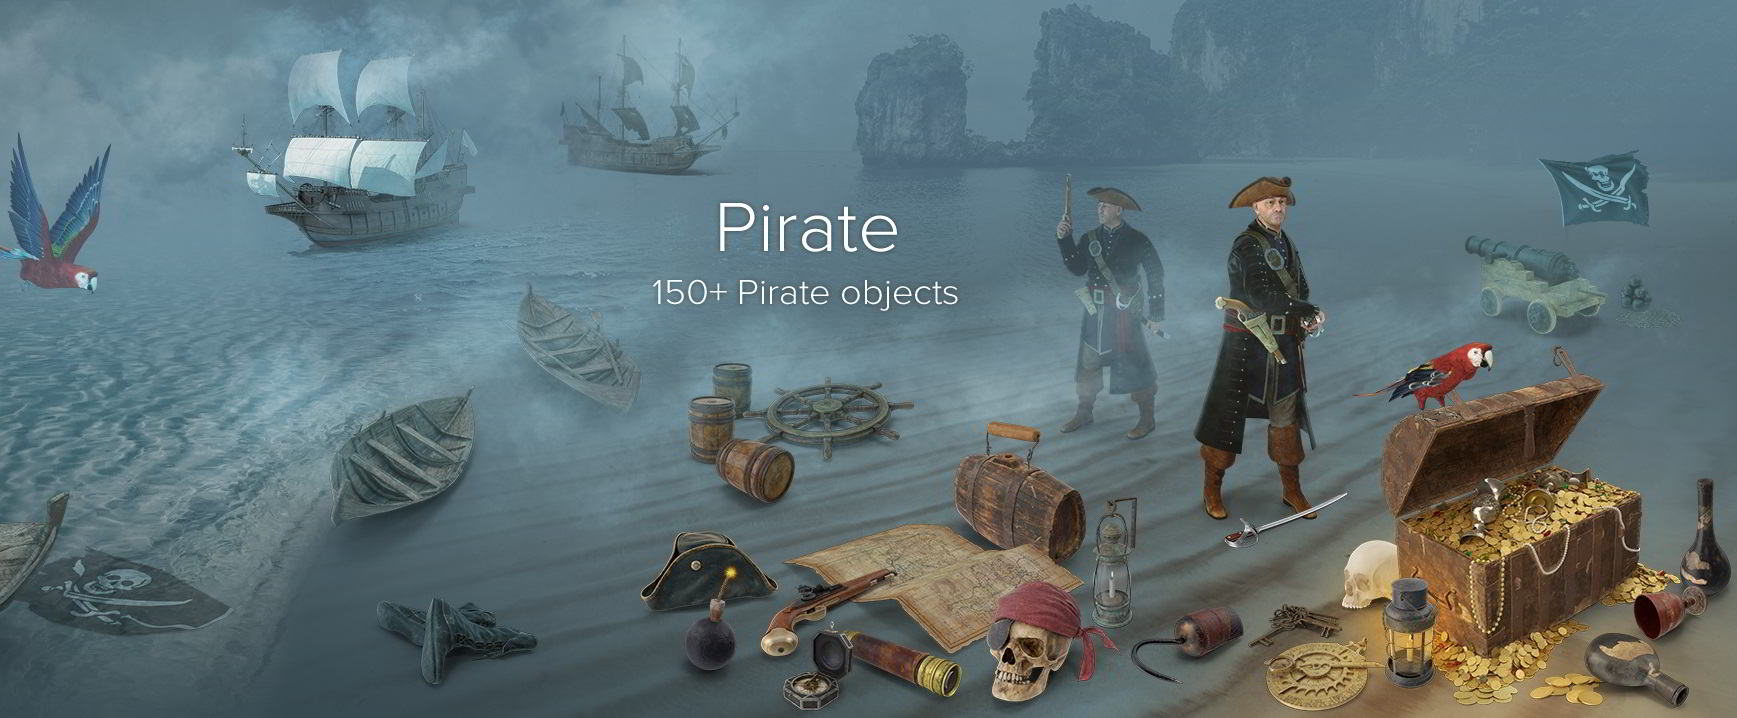 PixelSquid – Pirate Collection free download